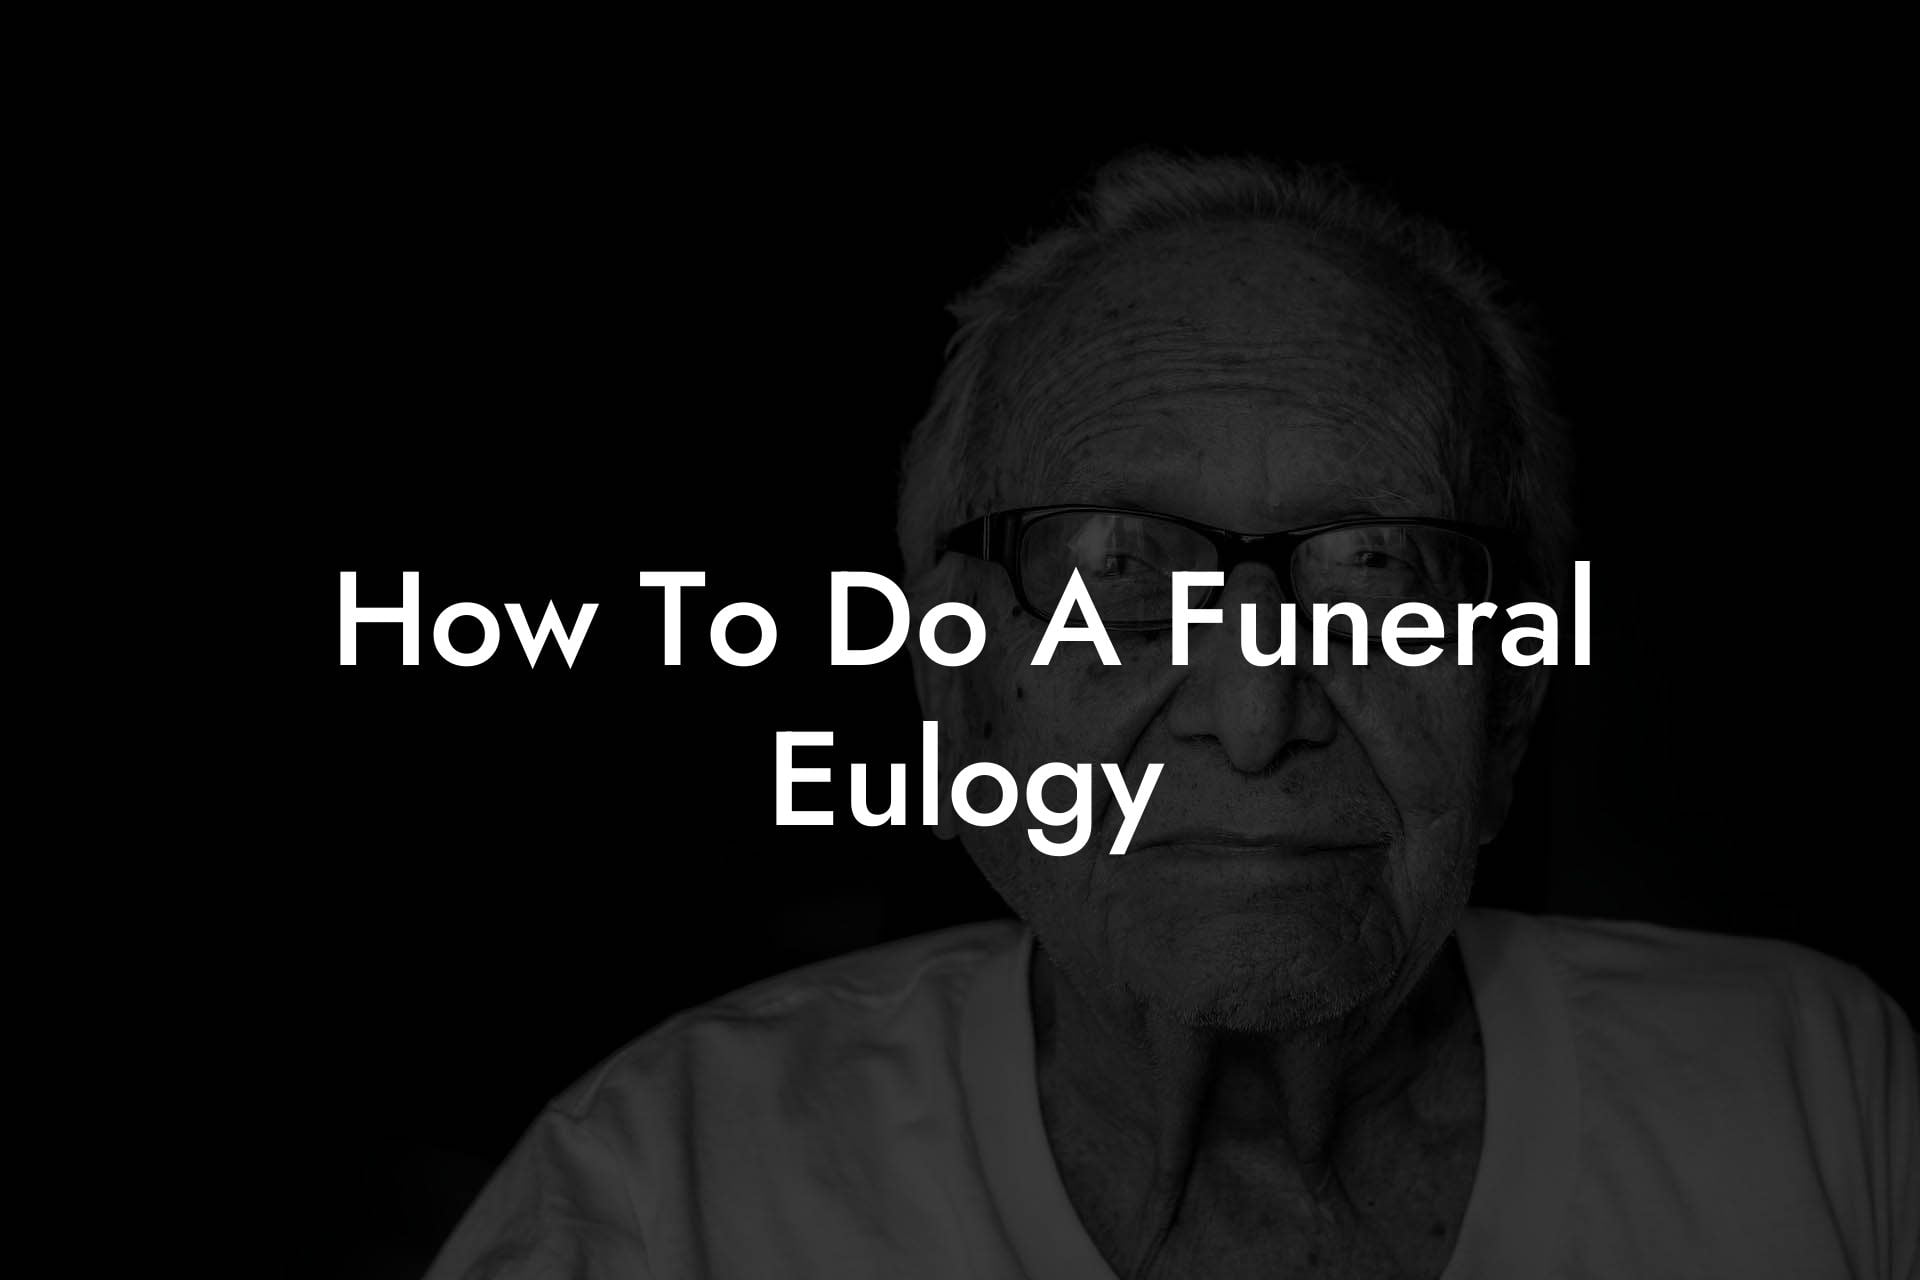 How To Do A Funeral Eulogy